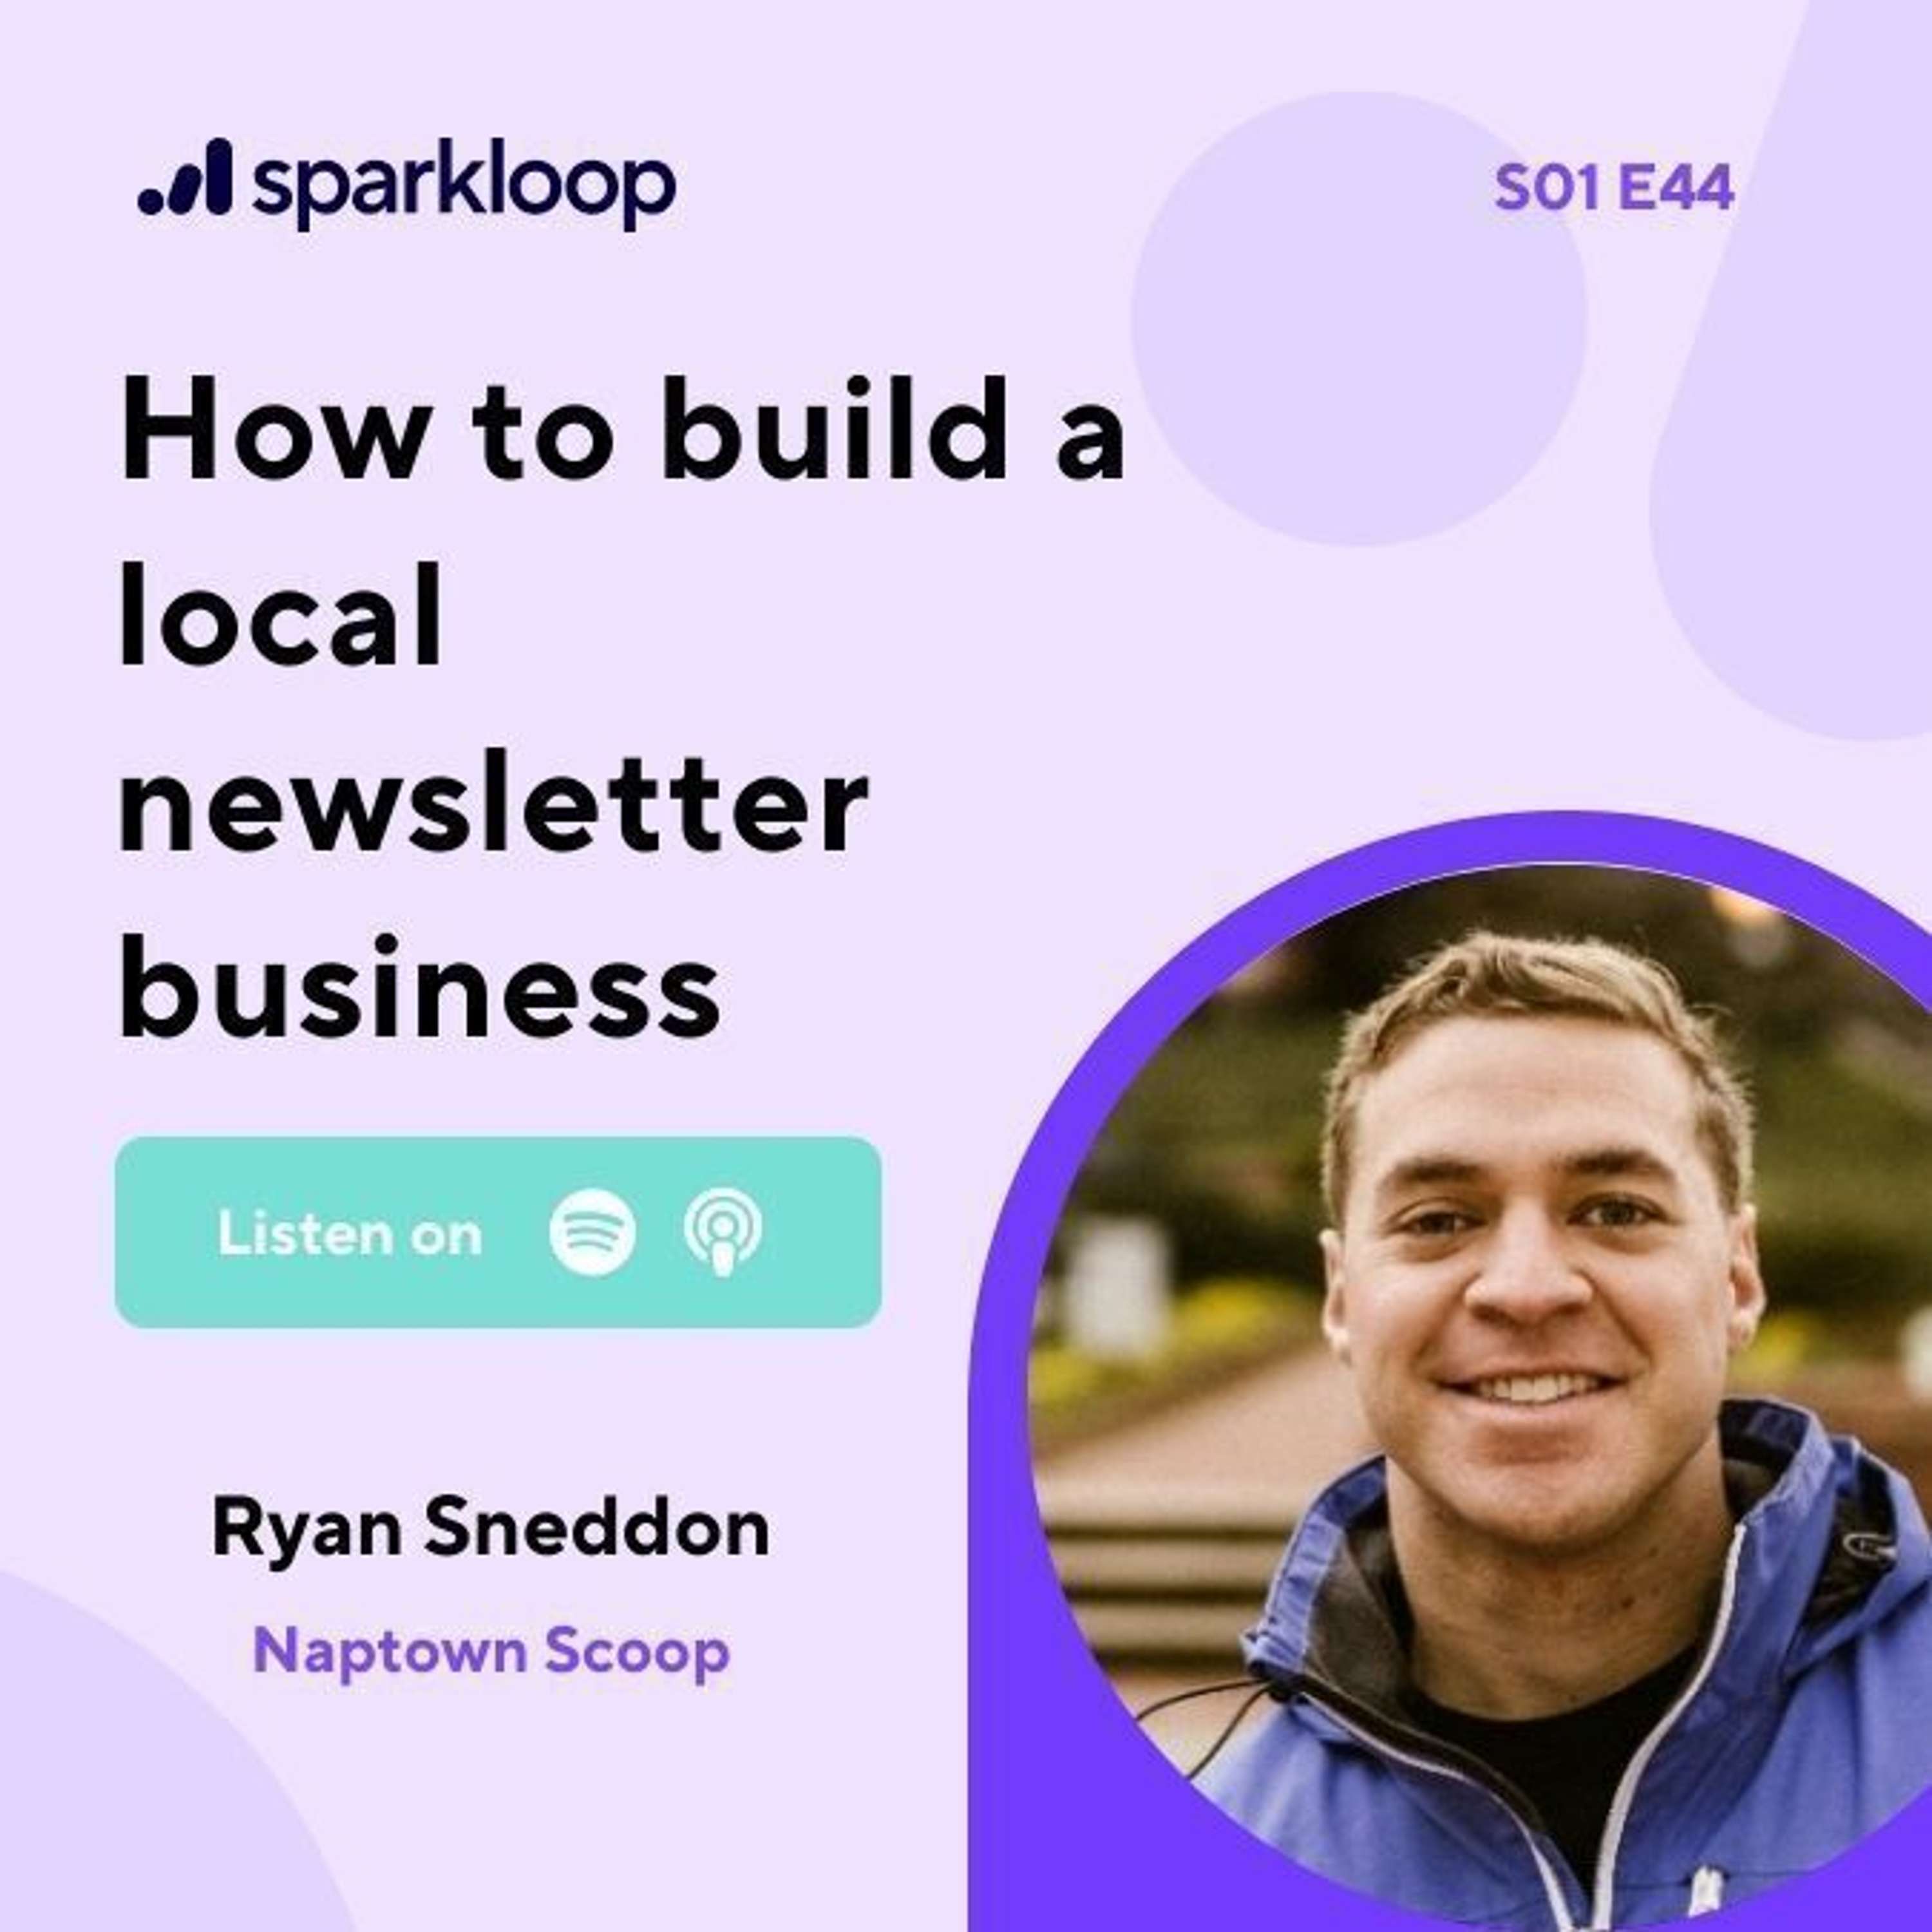 How to build a local newsletter business — with Ryan Sneddon of Naptown Scoop